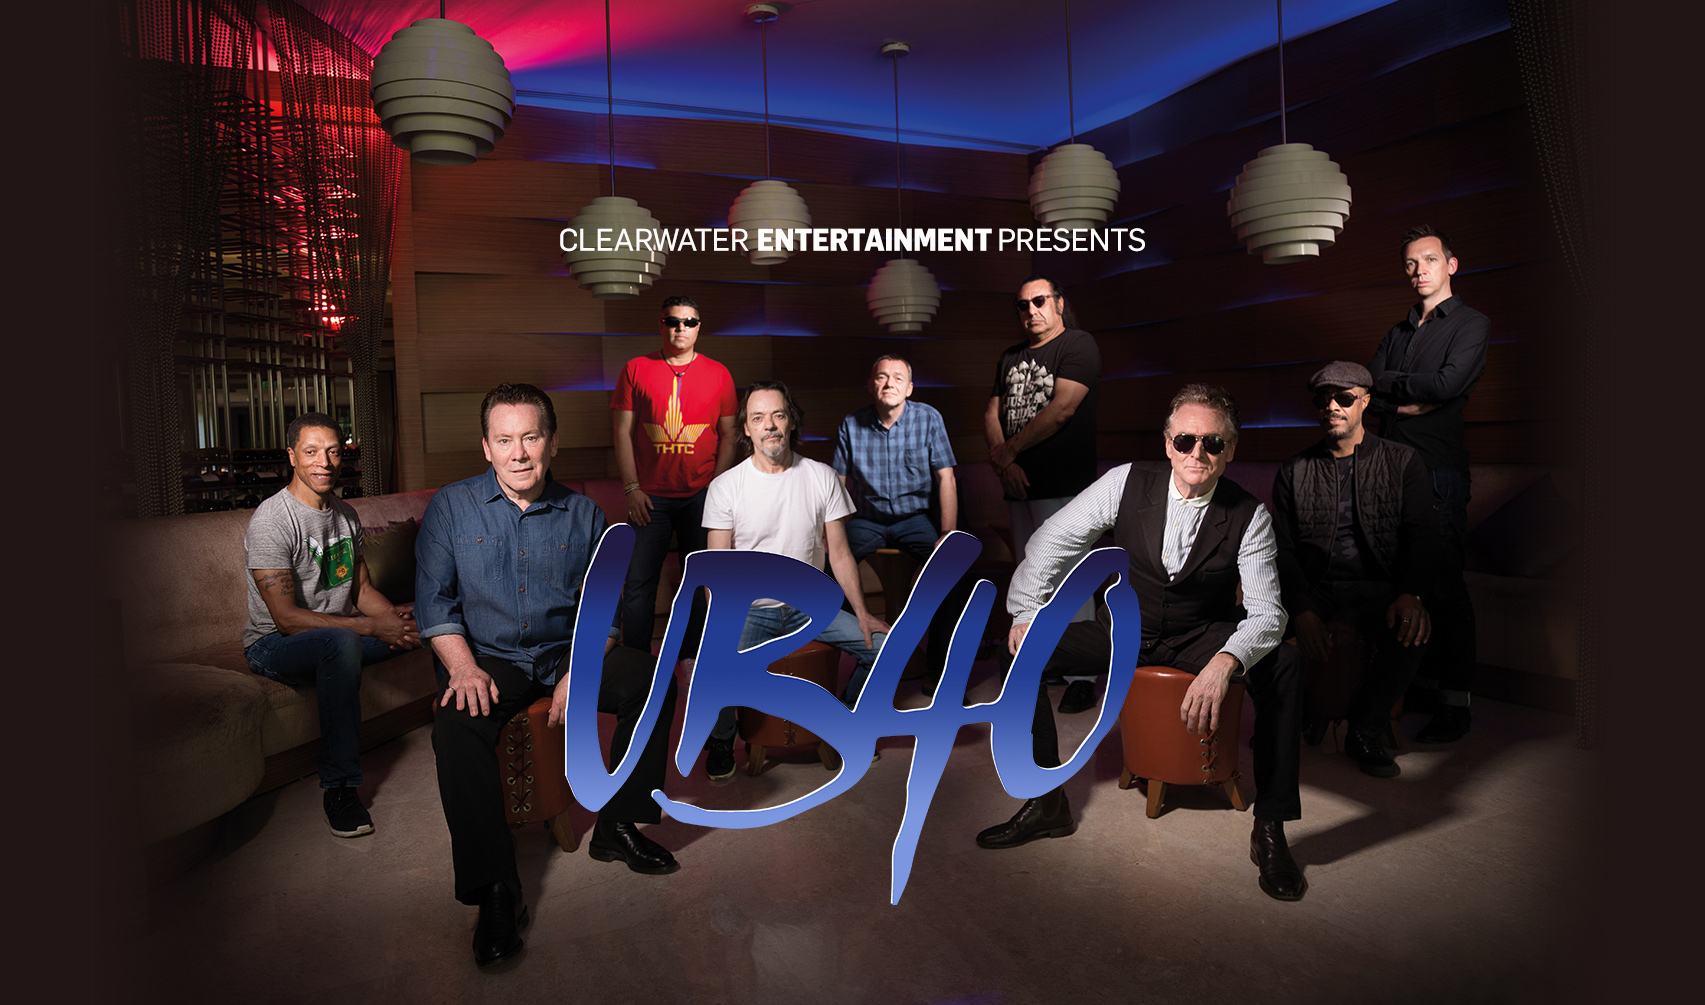 clearwater river casino concerts 2021